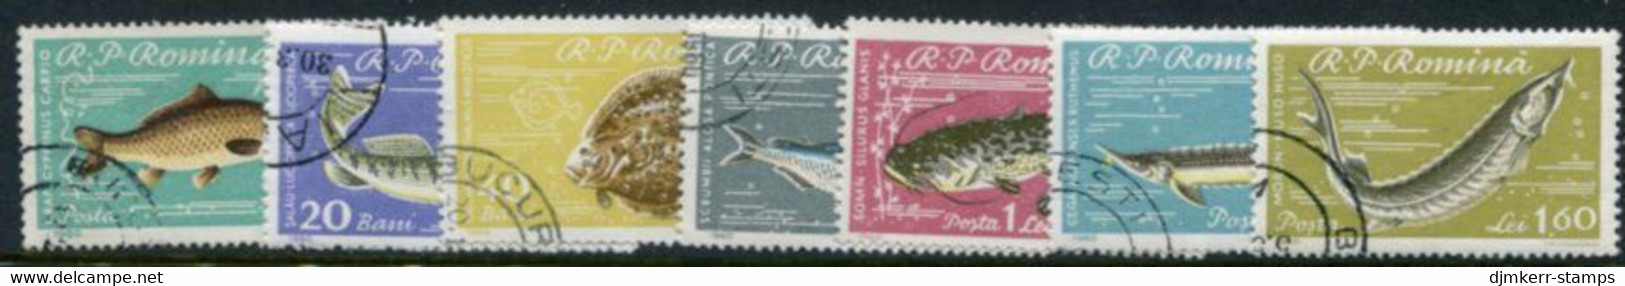 ROMANIA 1960 Fish Used.  Michel 1927-33 - Used Stamps